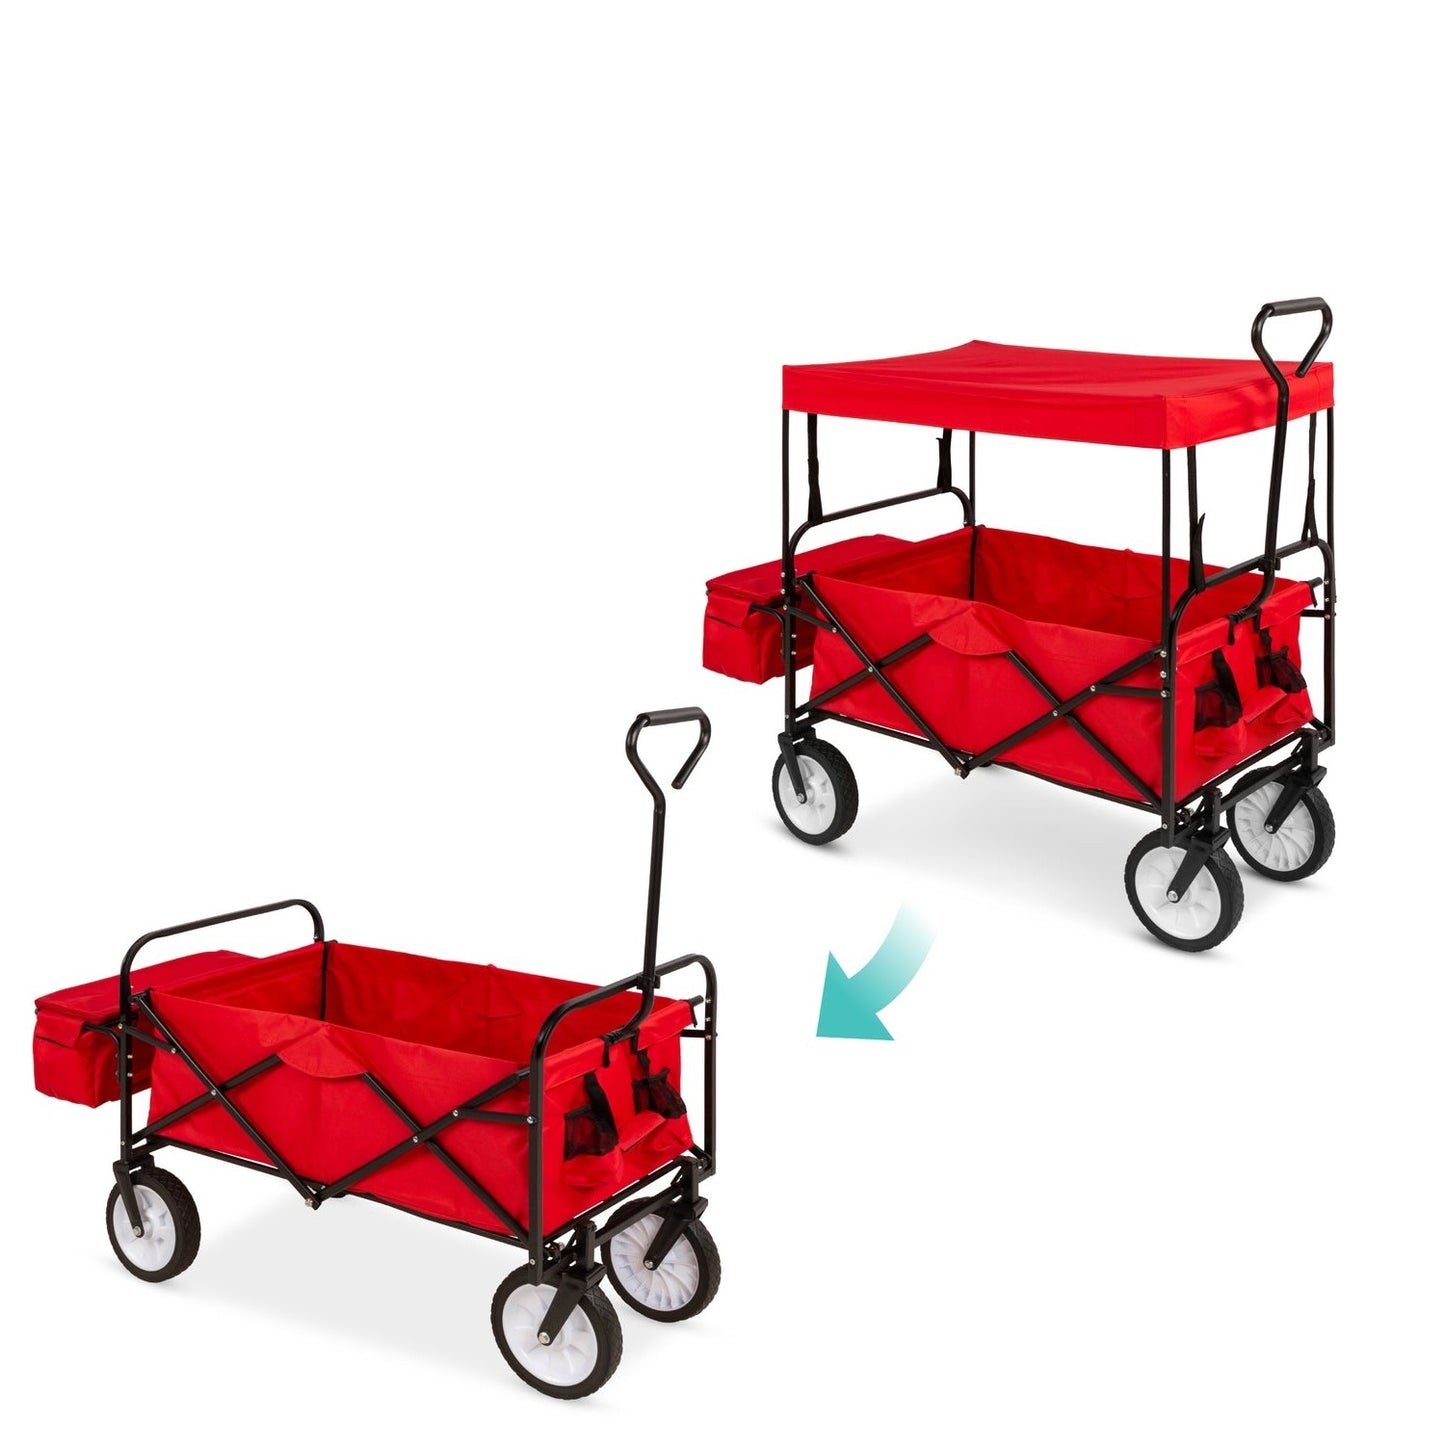 Collapsible Utility Wagon Cart Indoor/Outdoor with Canopy - Red